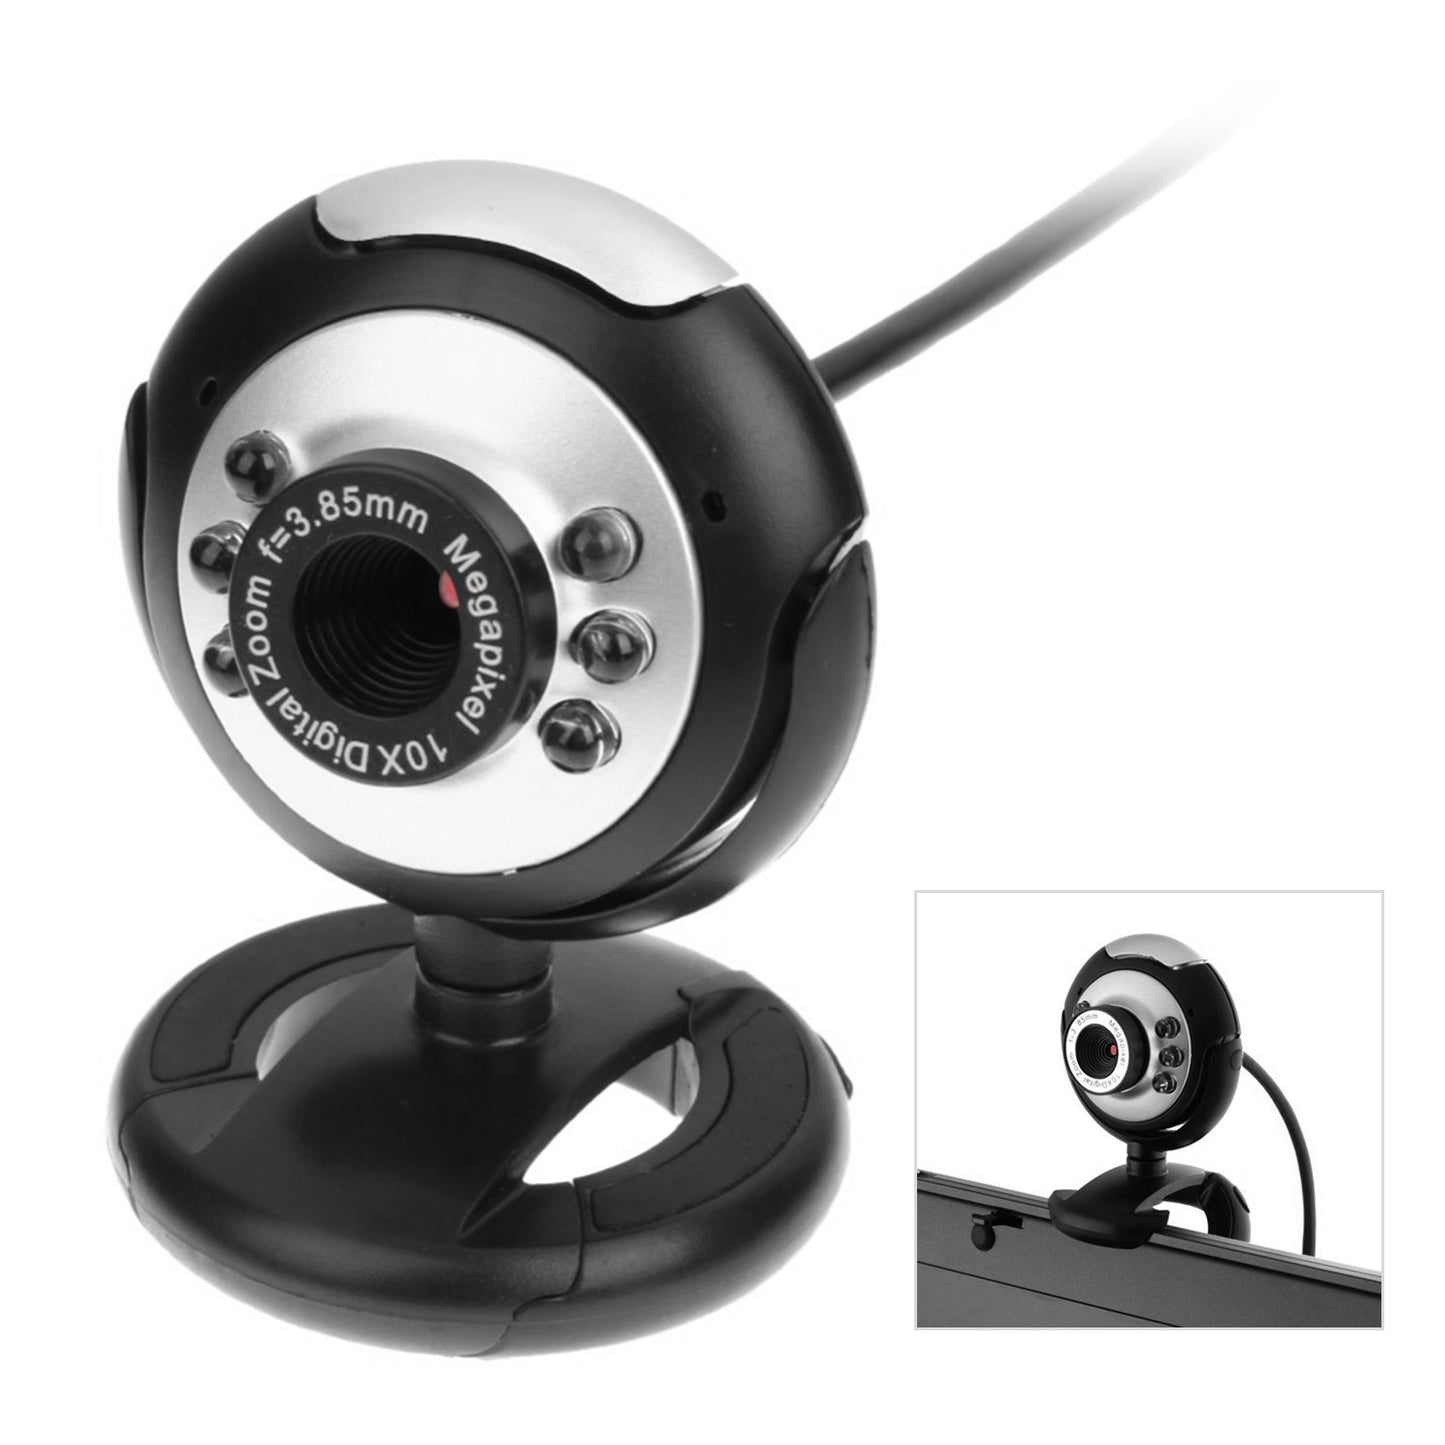 USB Multi-Megapixel Web Camera  with Microphone